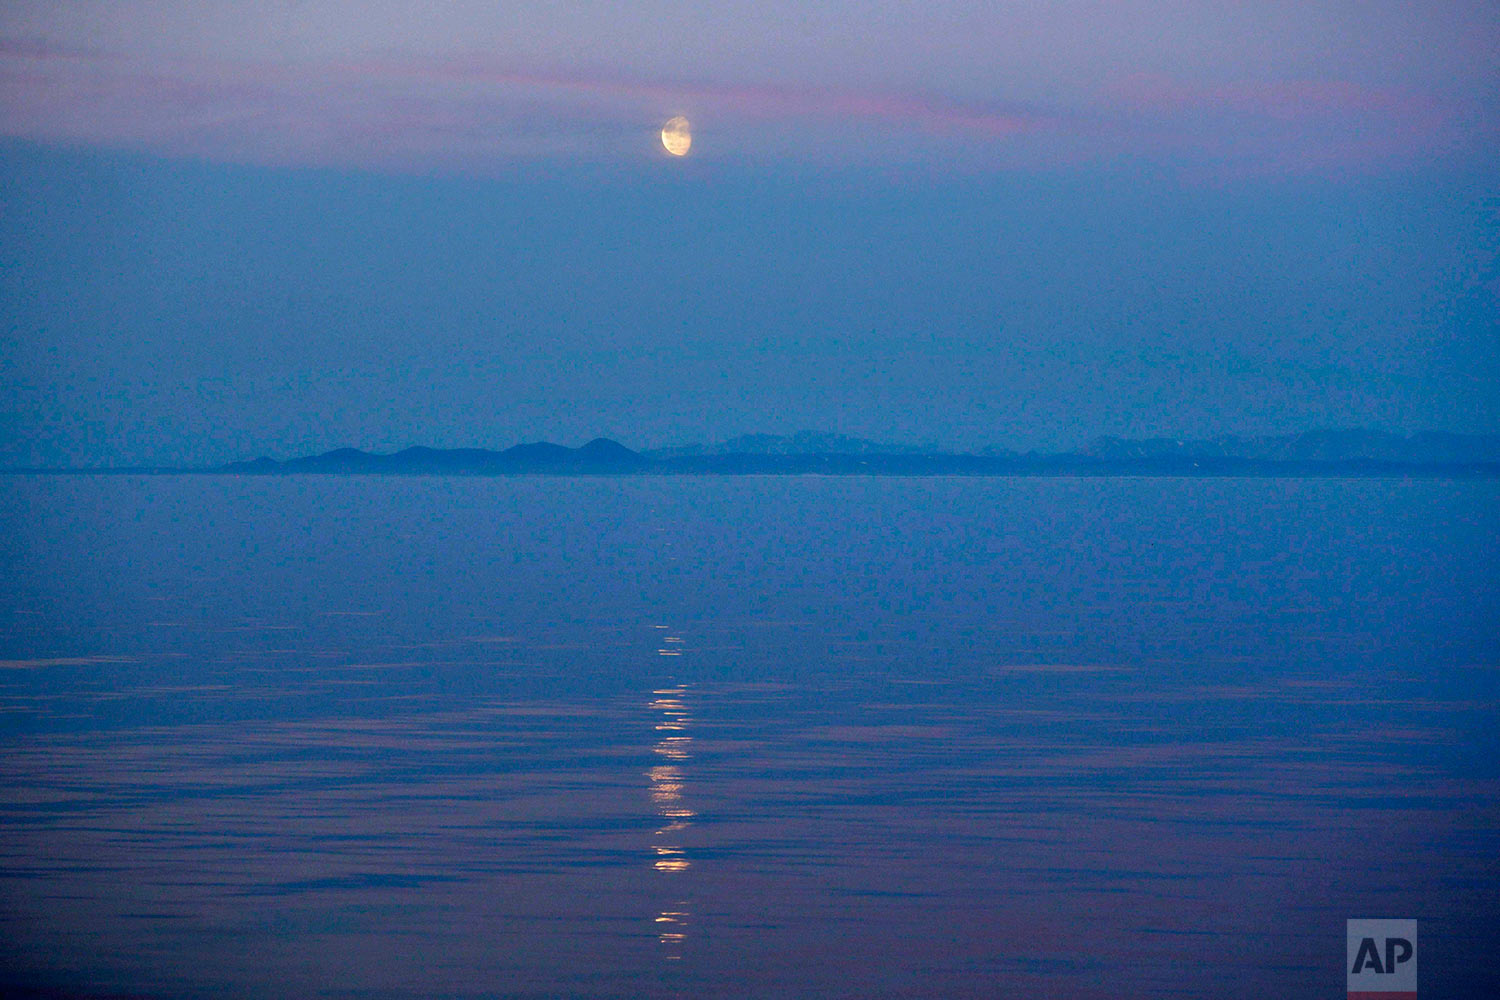  The moon rises over the coast of Alaska as the Finnish icebreaker MSV Nordica sails along the international date line through the Bering Strait, Friday, July 14, 2017. The international date line is an imaginary border that runs through the middle o